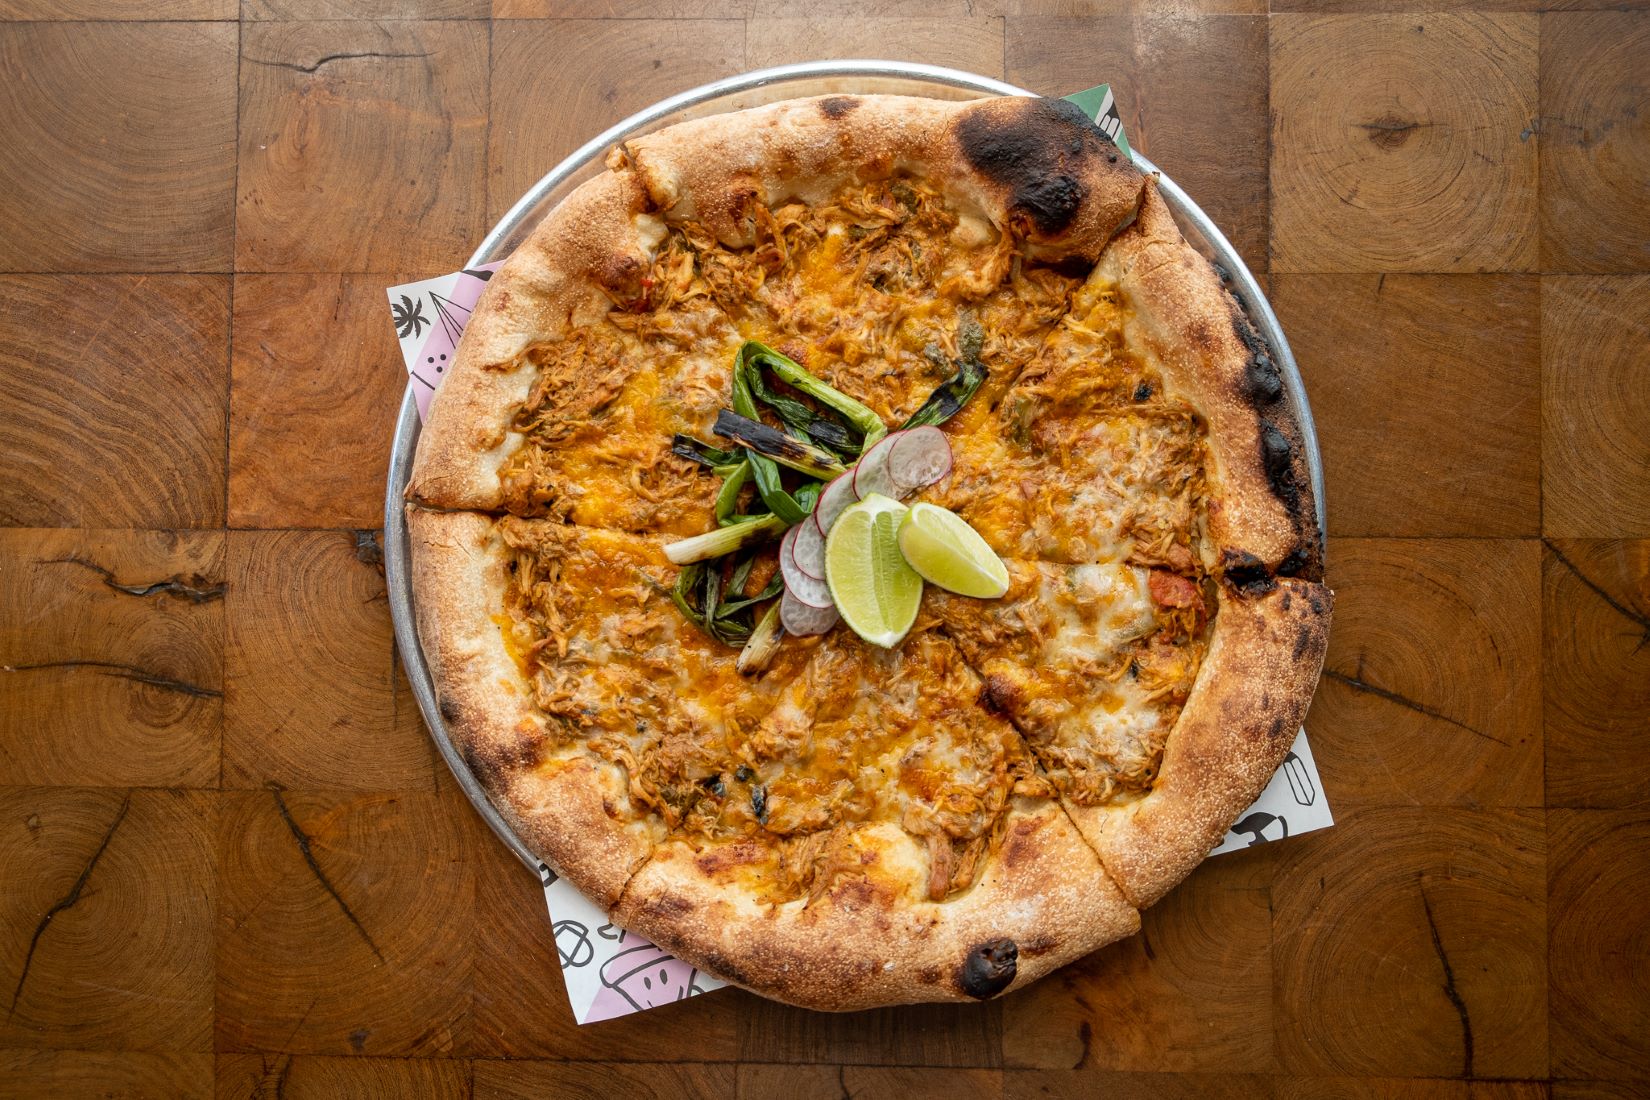 An image of the Chivichanga Pizza from  Pitfire Pizza and Los Angeles' award-winning taqueria Sonoratown.